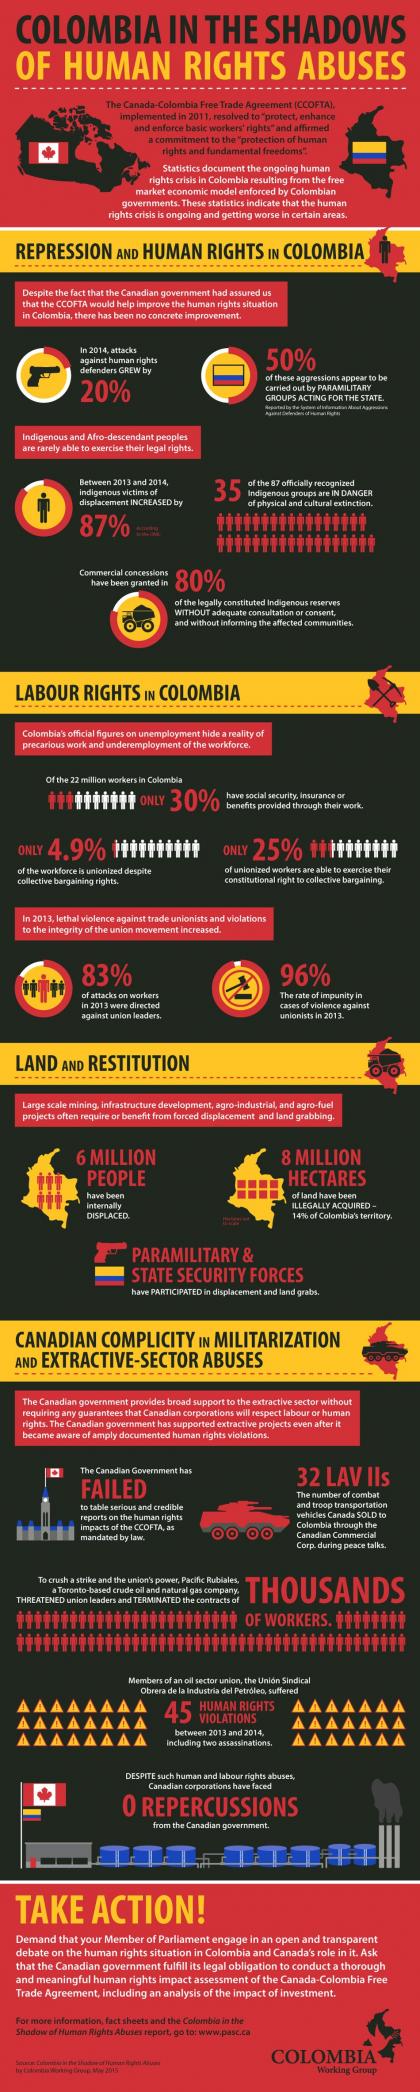 Colombia in the Shadow of Human Right Abuse - Infographic